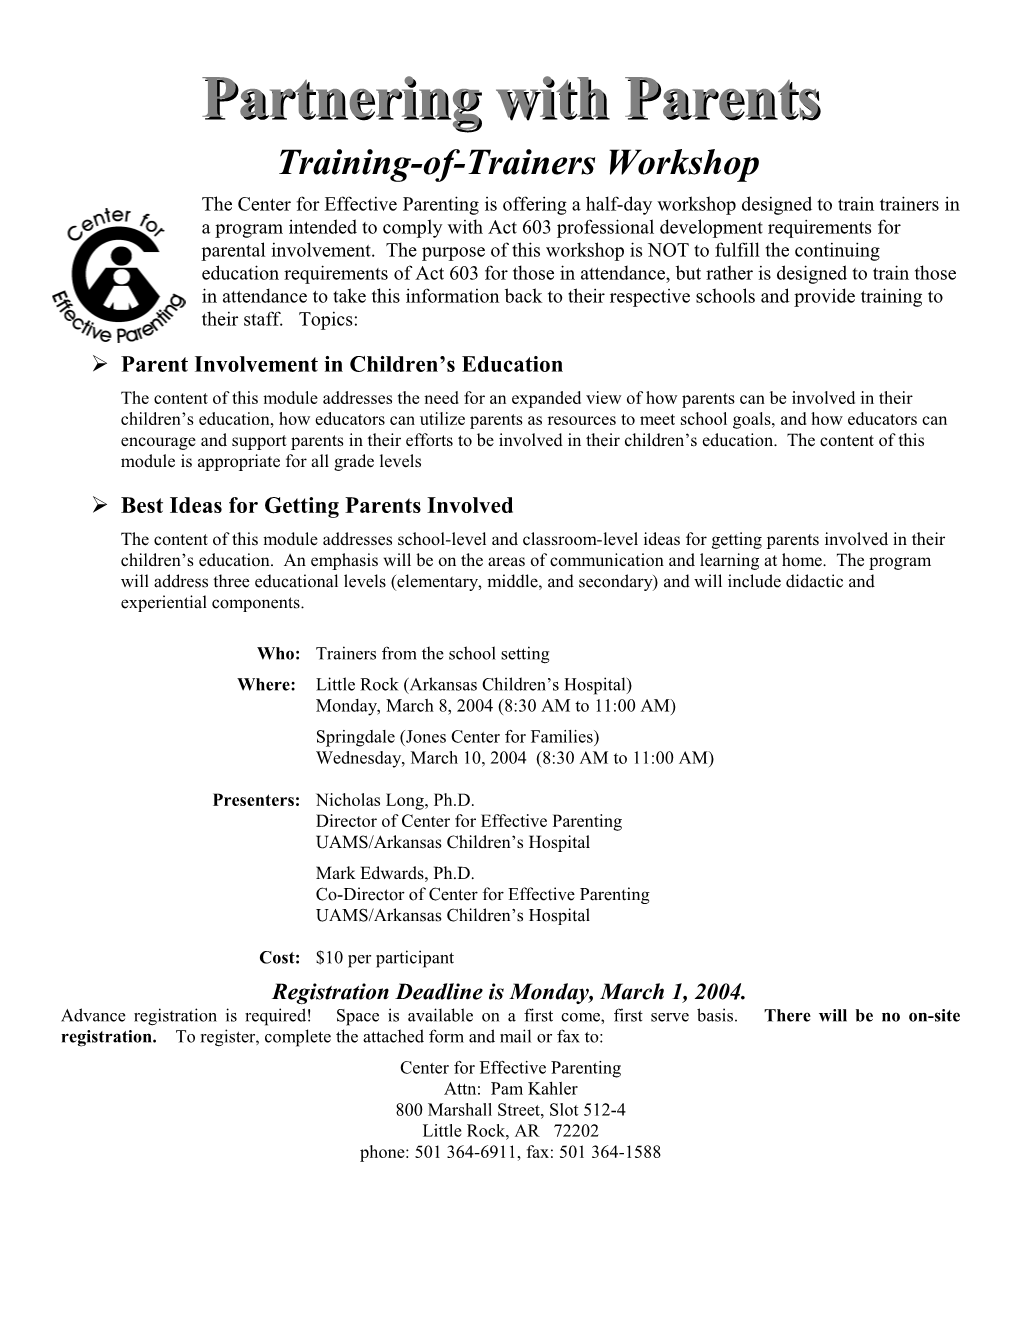 For More Information Or to Request a Workshop for Your Parent Group, Contact Pam Kahler